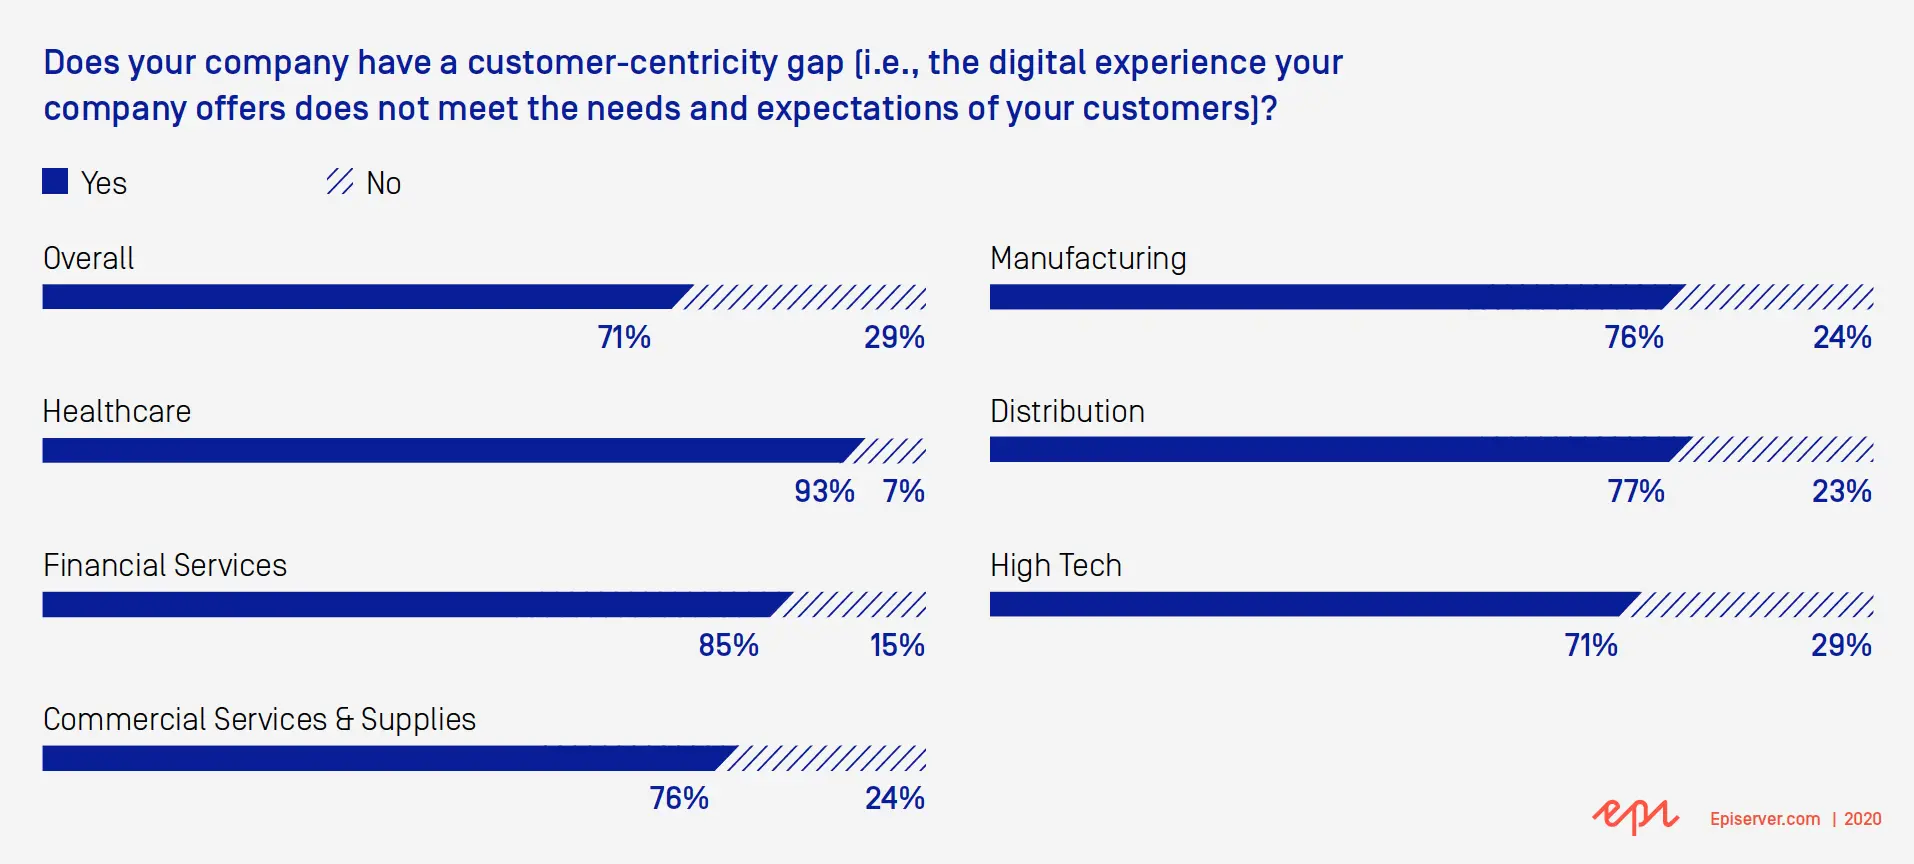 Survey responses for Does your company have a customer-centricity gap?